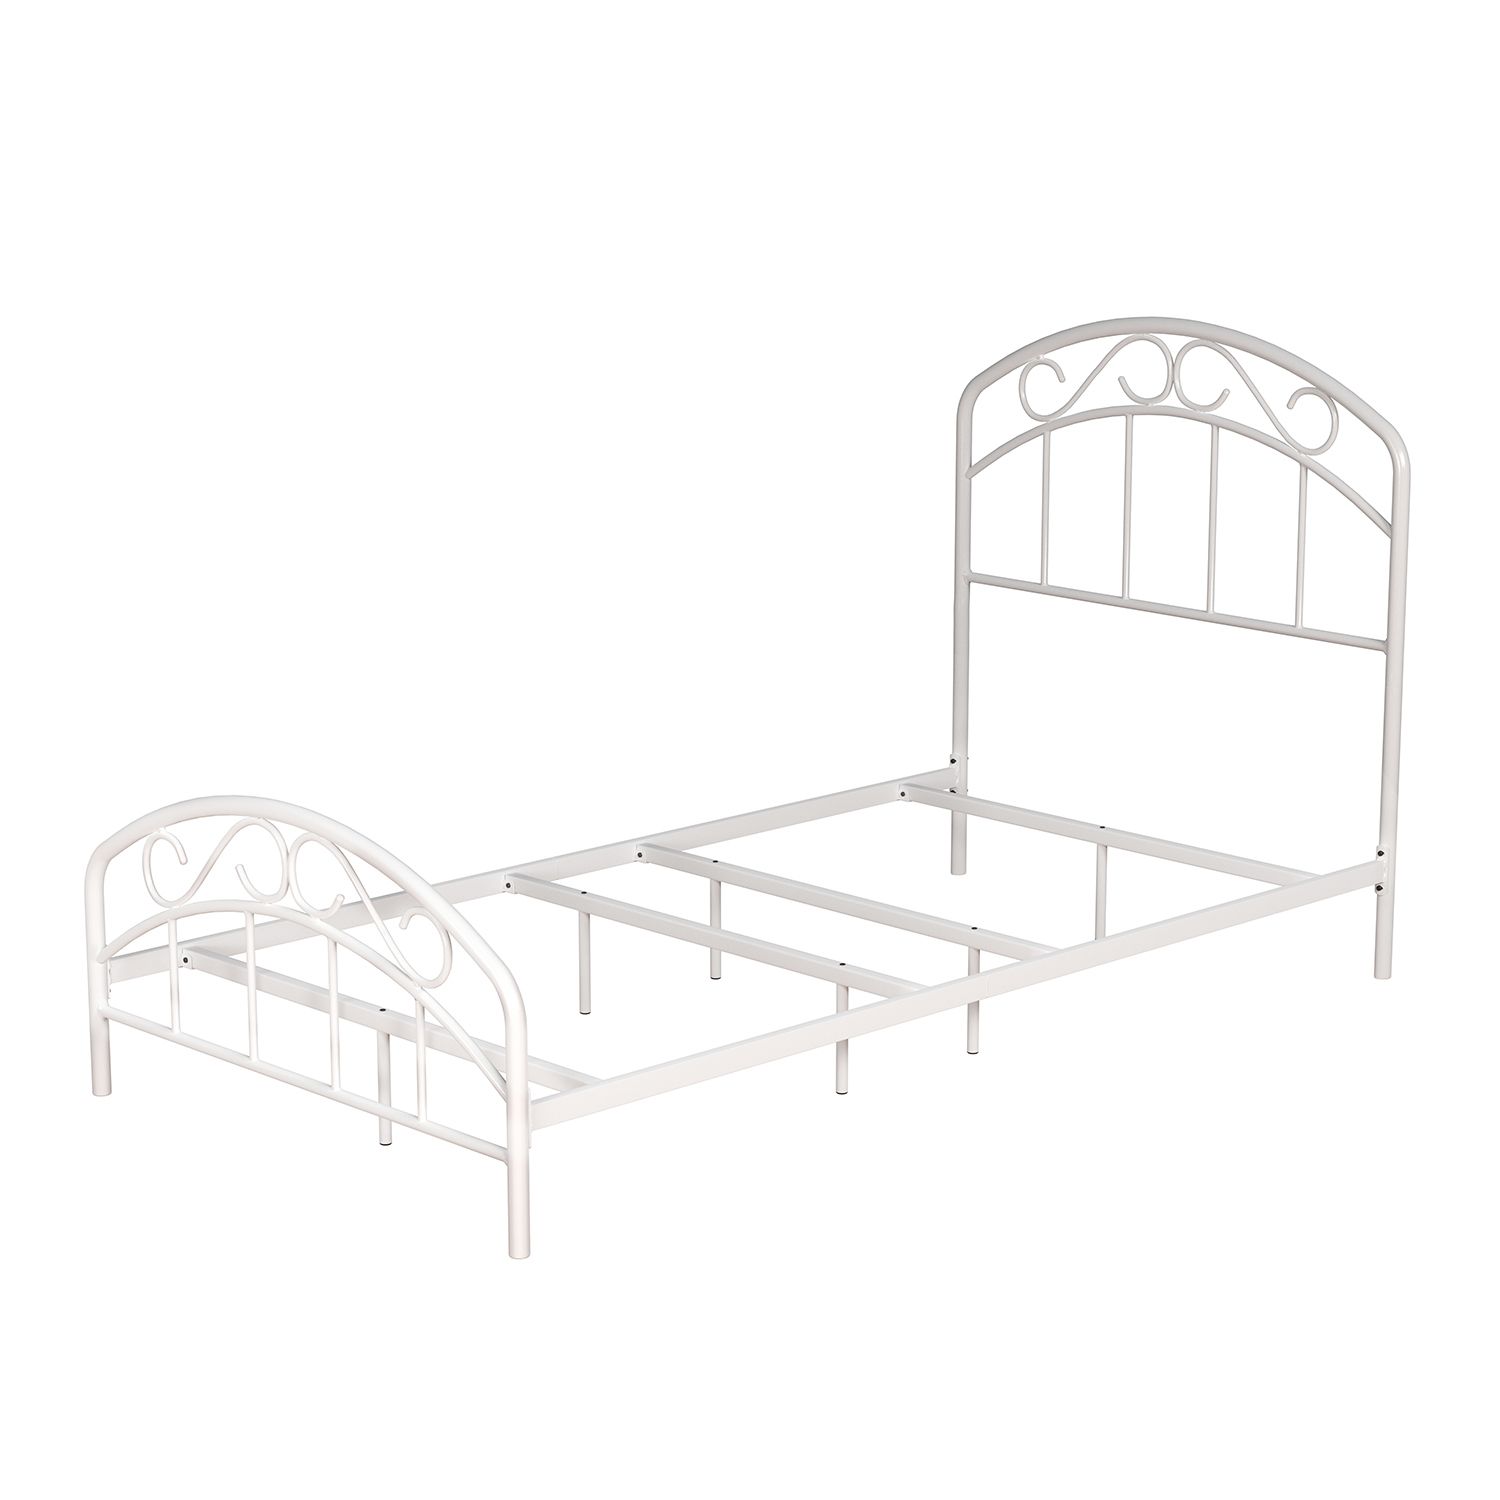 Image for Hillsdale Furniture Jolie Scroll Bed at Kohl's.